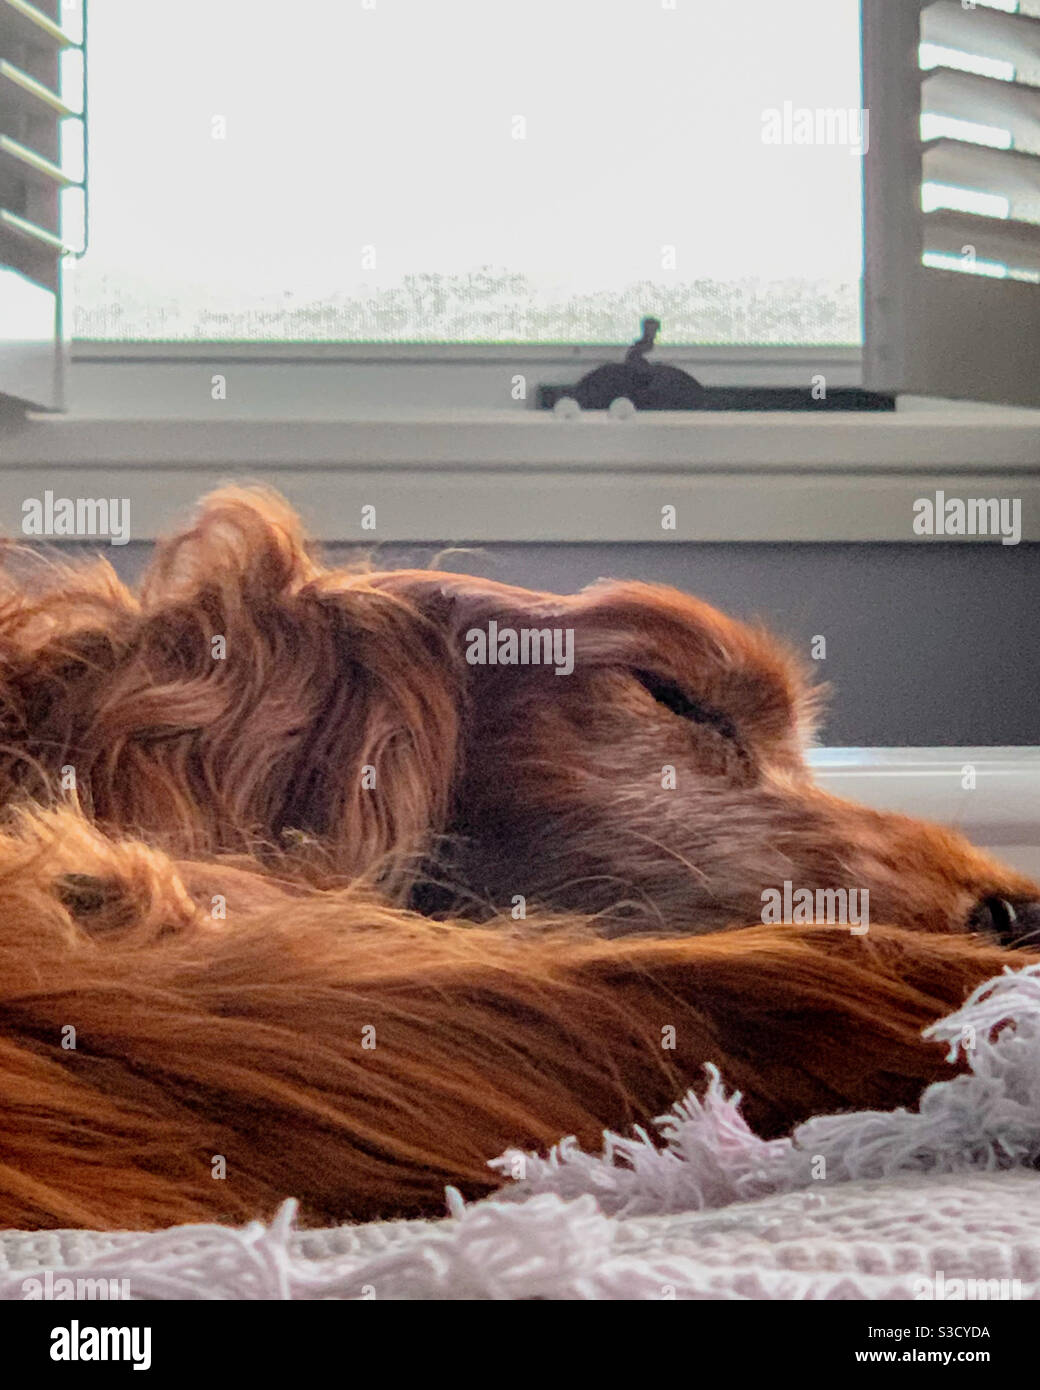 Let sleeping dogs lie. A red setter naps blissfully by the window under a cool breeze. Closeup on head Stock Photo